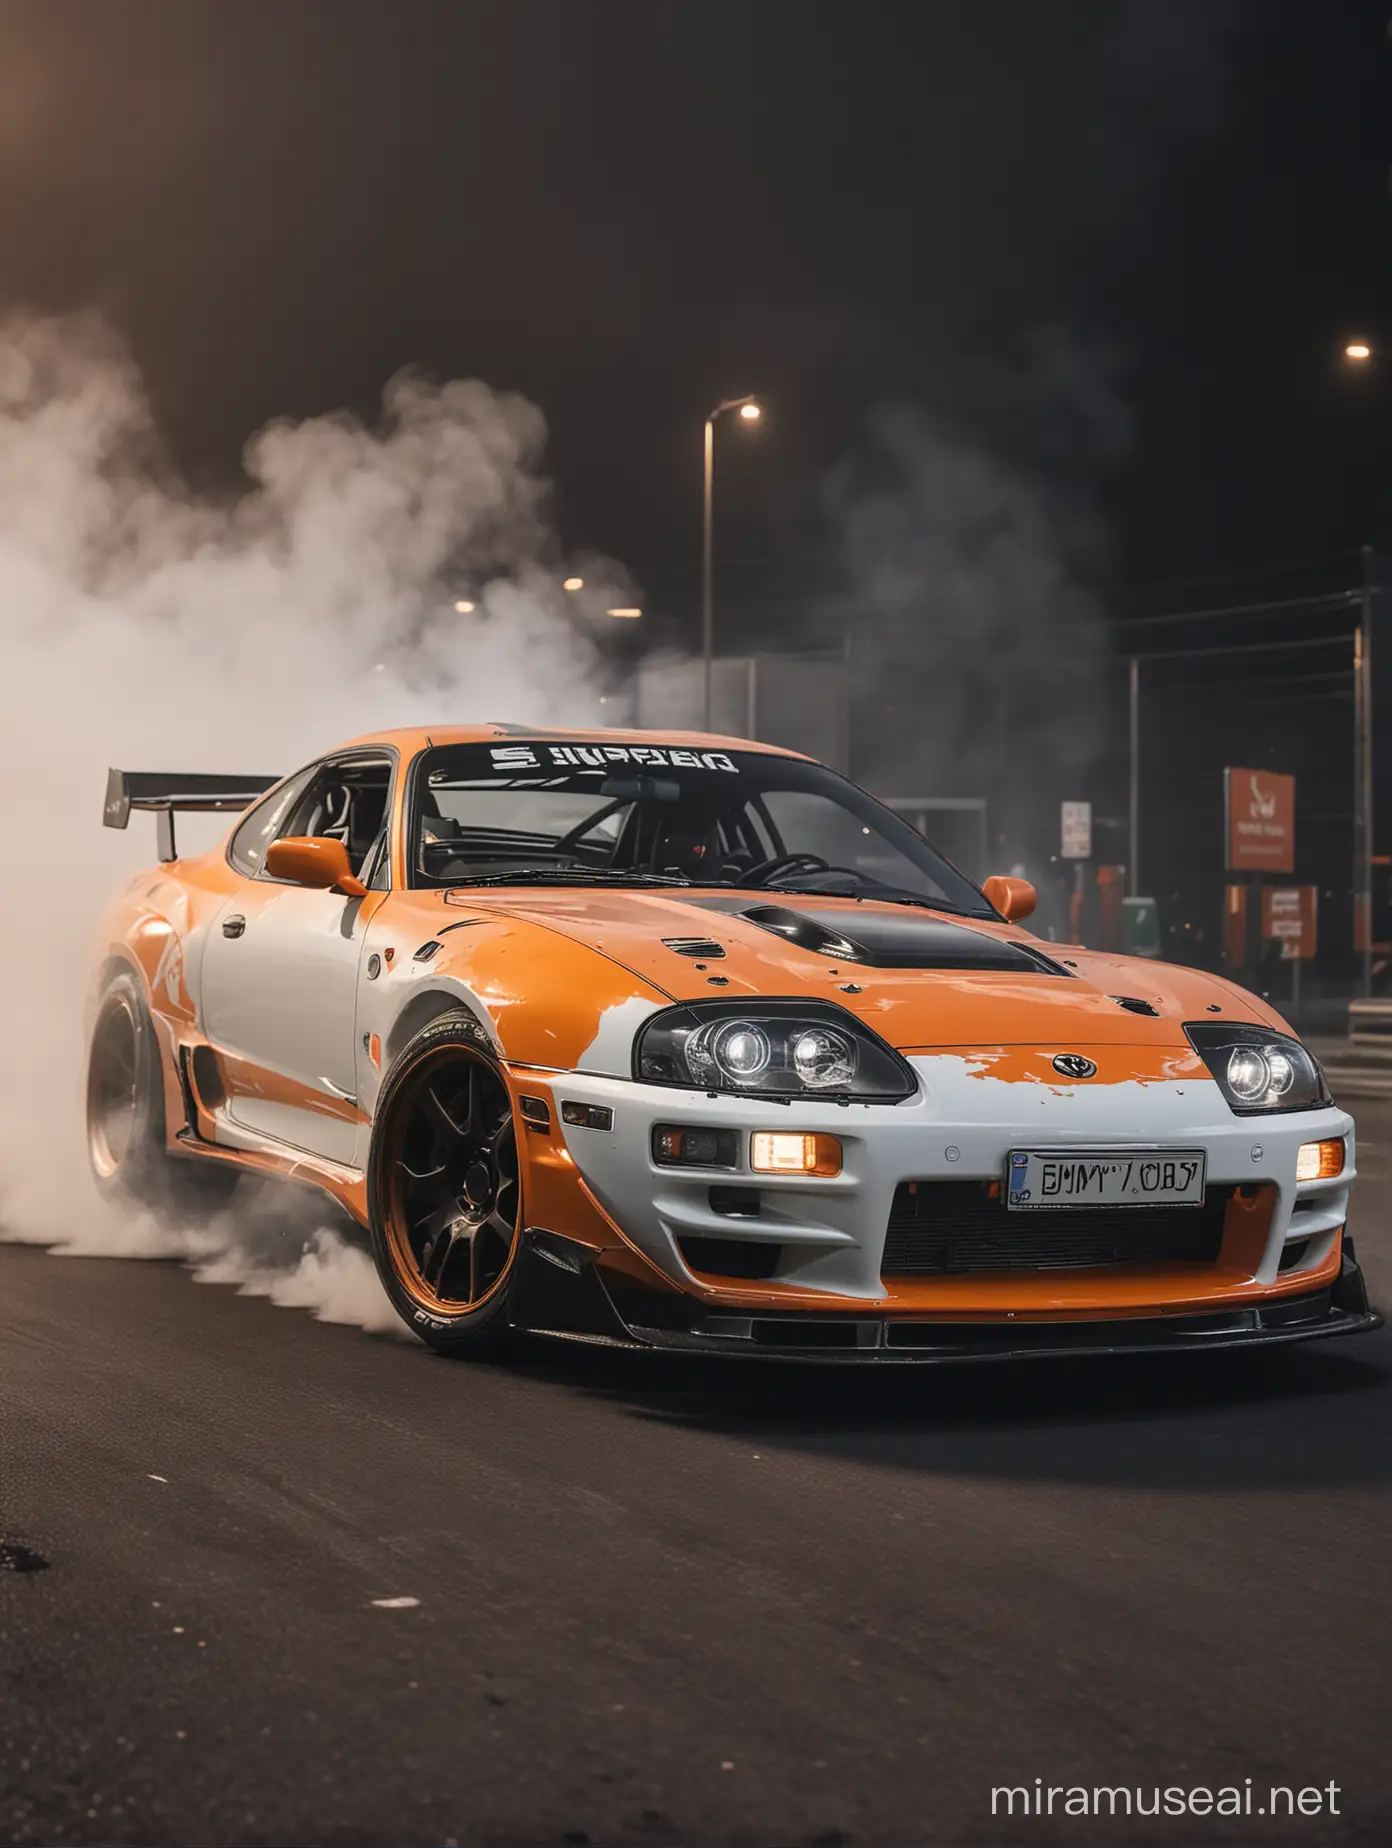 Generate a realistic photo,Side Front view, Toyota Supra 1990, White, Headlights black and orange, Wide race body kit, Drift Photoshoot, CAMERA HAZE, BLUR, Magazine LUT, HIGH RESOLUTION, real size, Smoke on tires, dynamic move, drone overview, Night time

